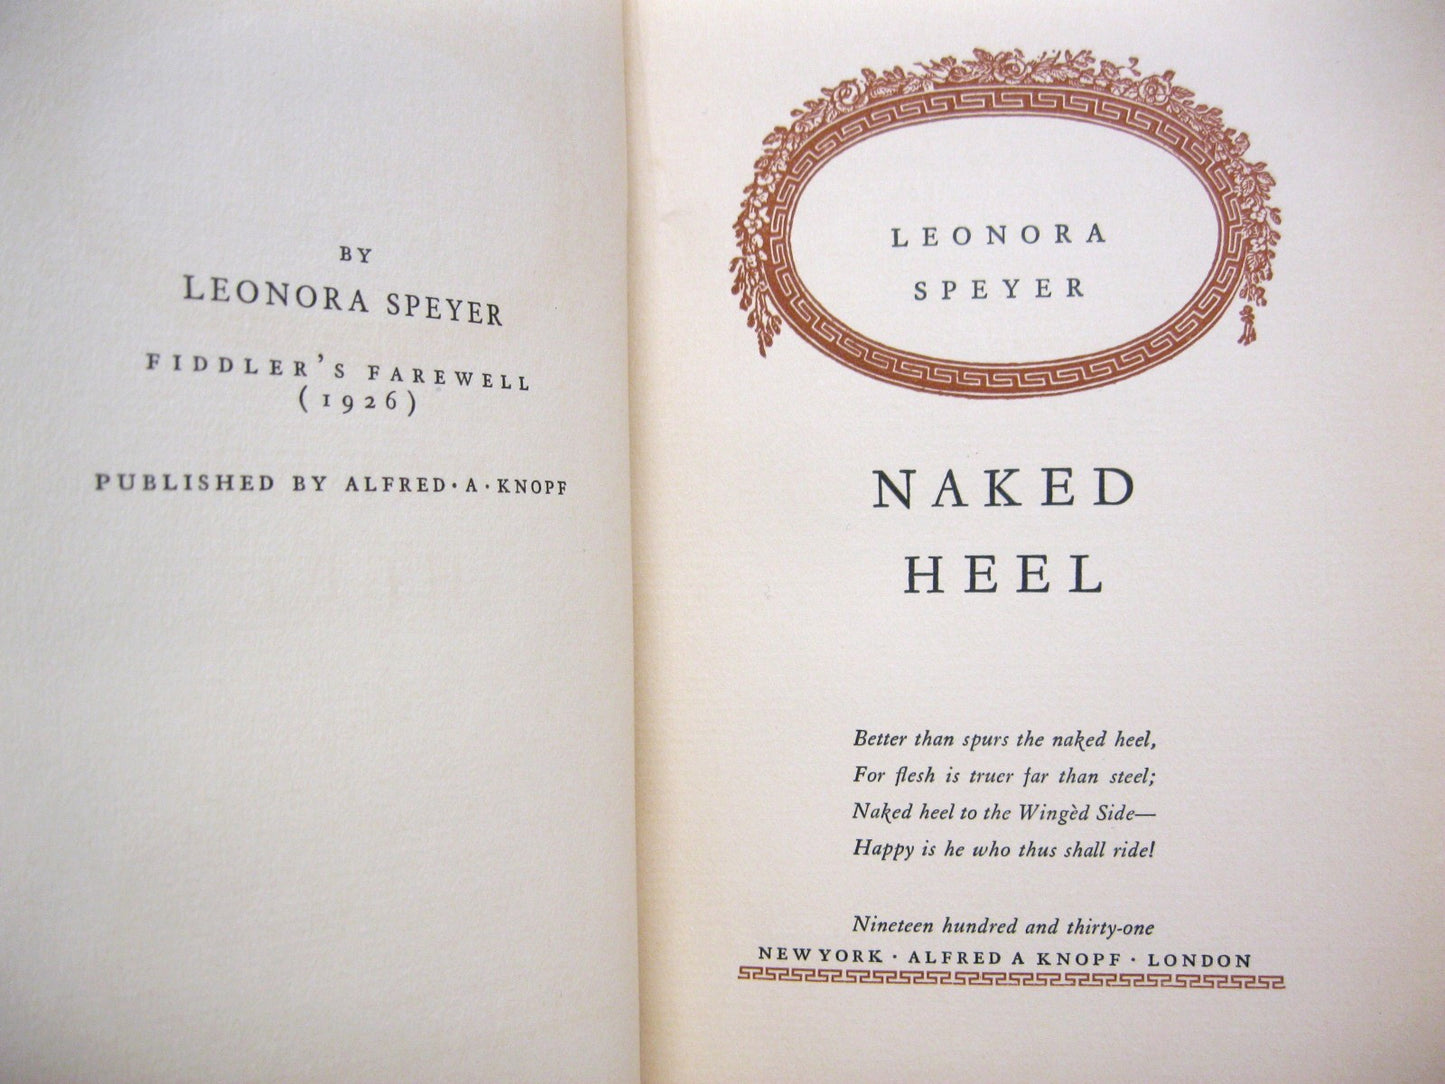 Naked Heel by Leonora Speyer